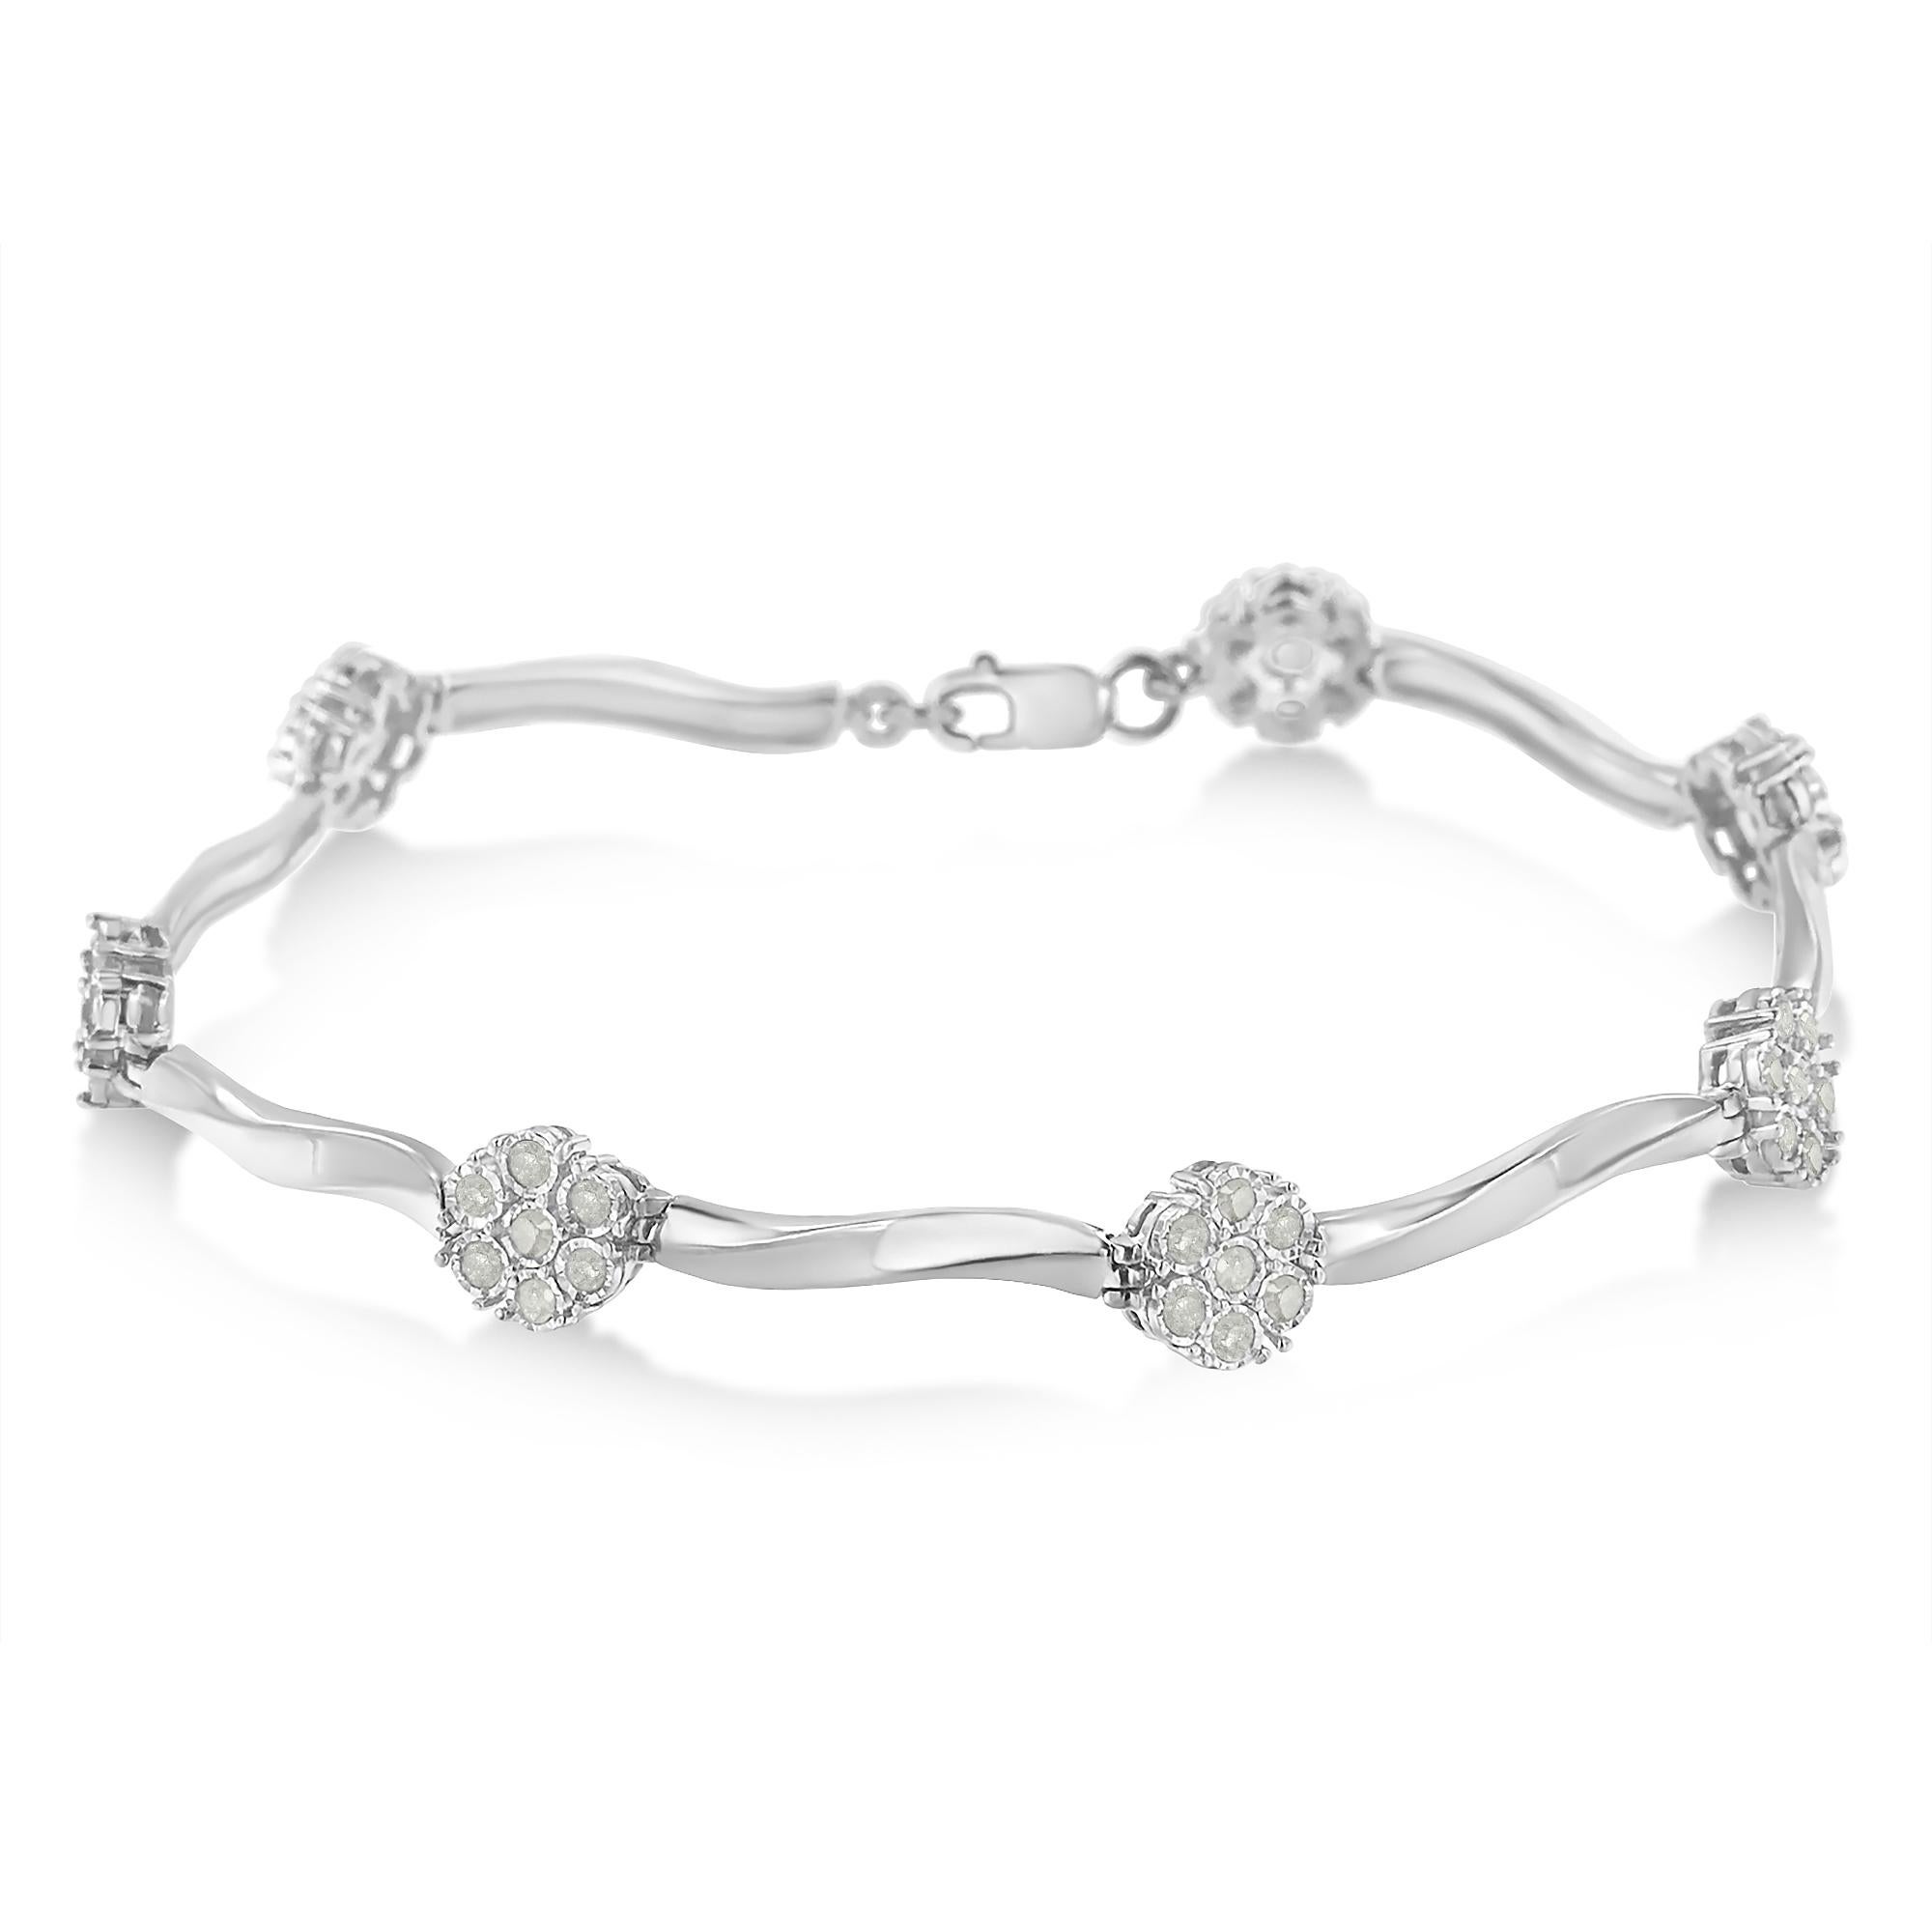 Elegant and timeless, this gorgeous sterling silver link bracelet features 1.0 carat total weight of round diamonds. The tennis bracelet features stations with a cluster of seven illusion set diamonds in our unique miracle-plate setting, which